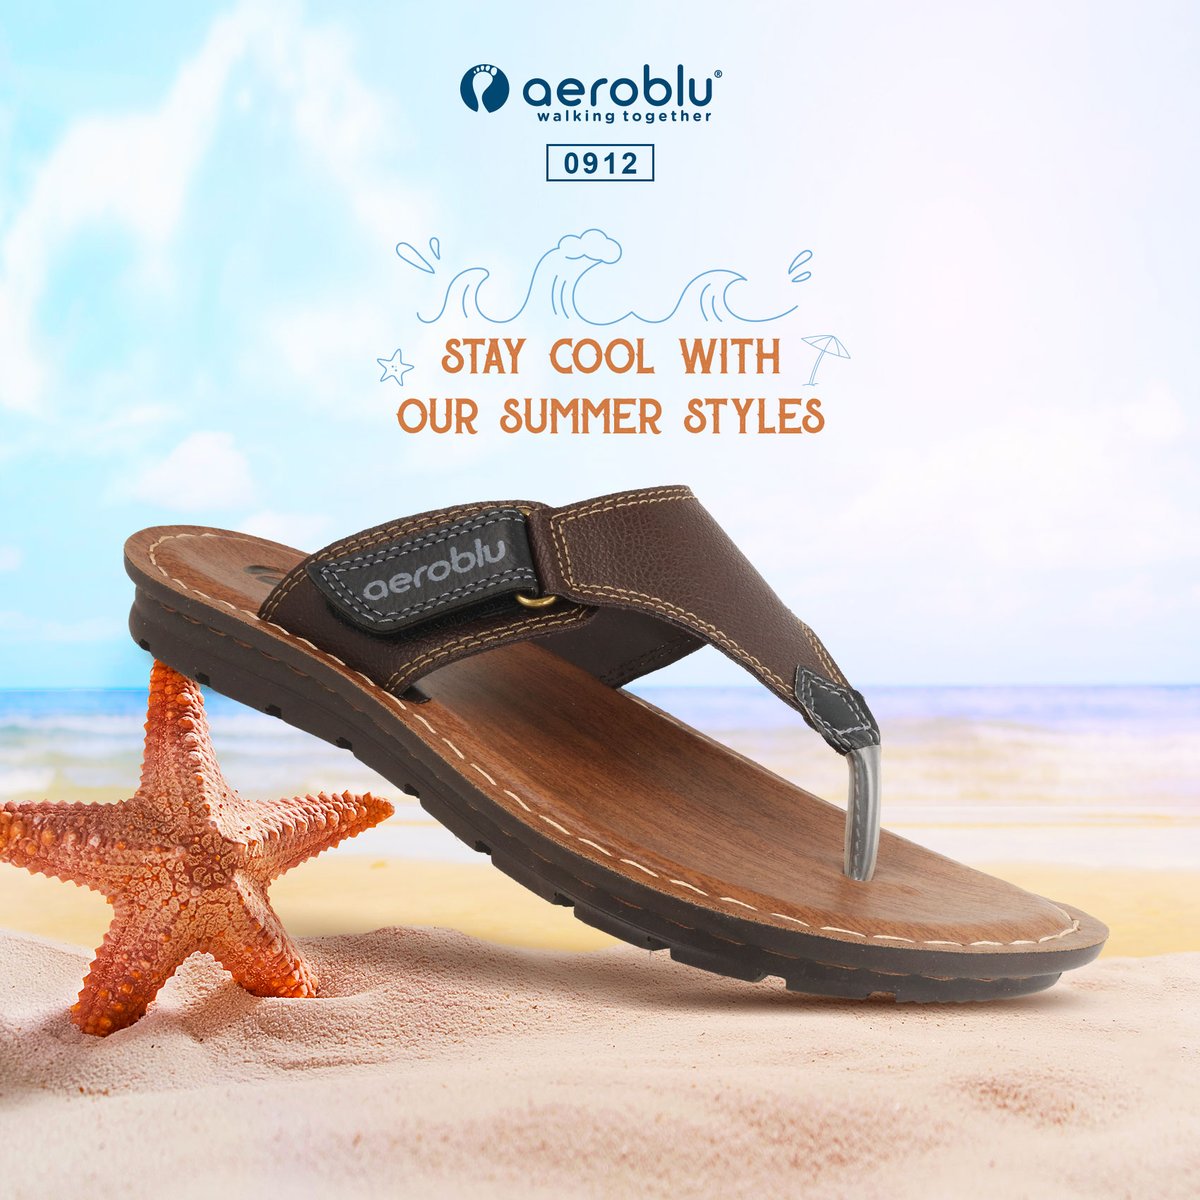 Get your feet ready for some fun in the sun with this essential footwear. . . . #summerstyle #footwearfashion #shoesofsummer #sandalseason #summerkicks #beachshoes #sunnyfootwear #summervibes#sandalseason #shoegamestrong #BeachReady